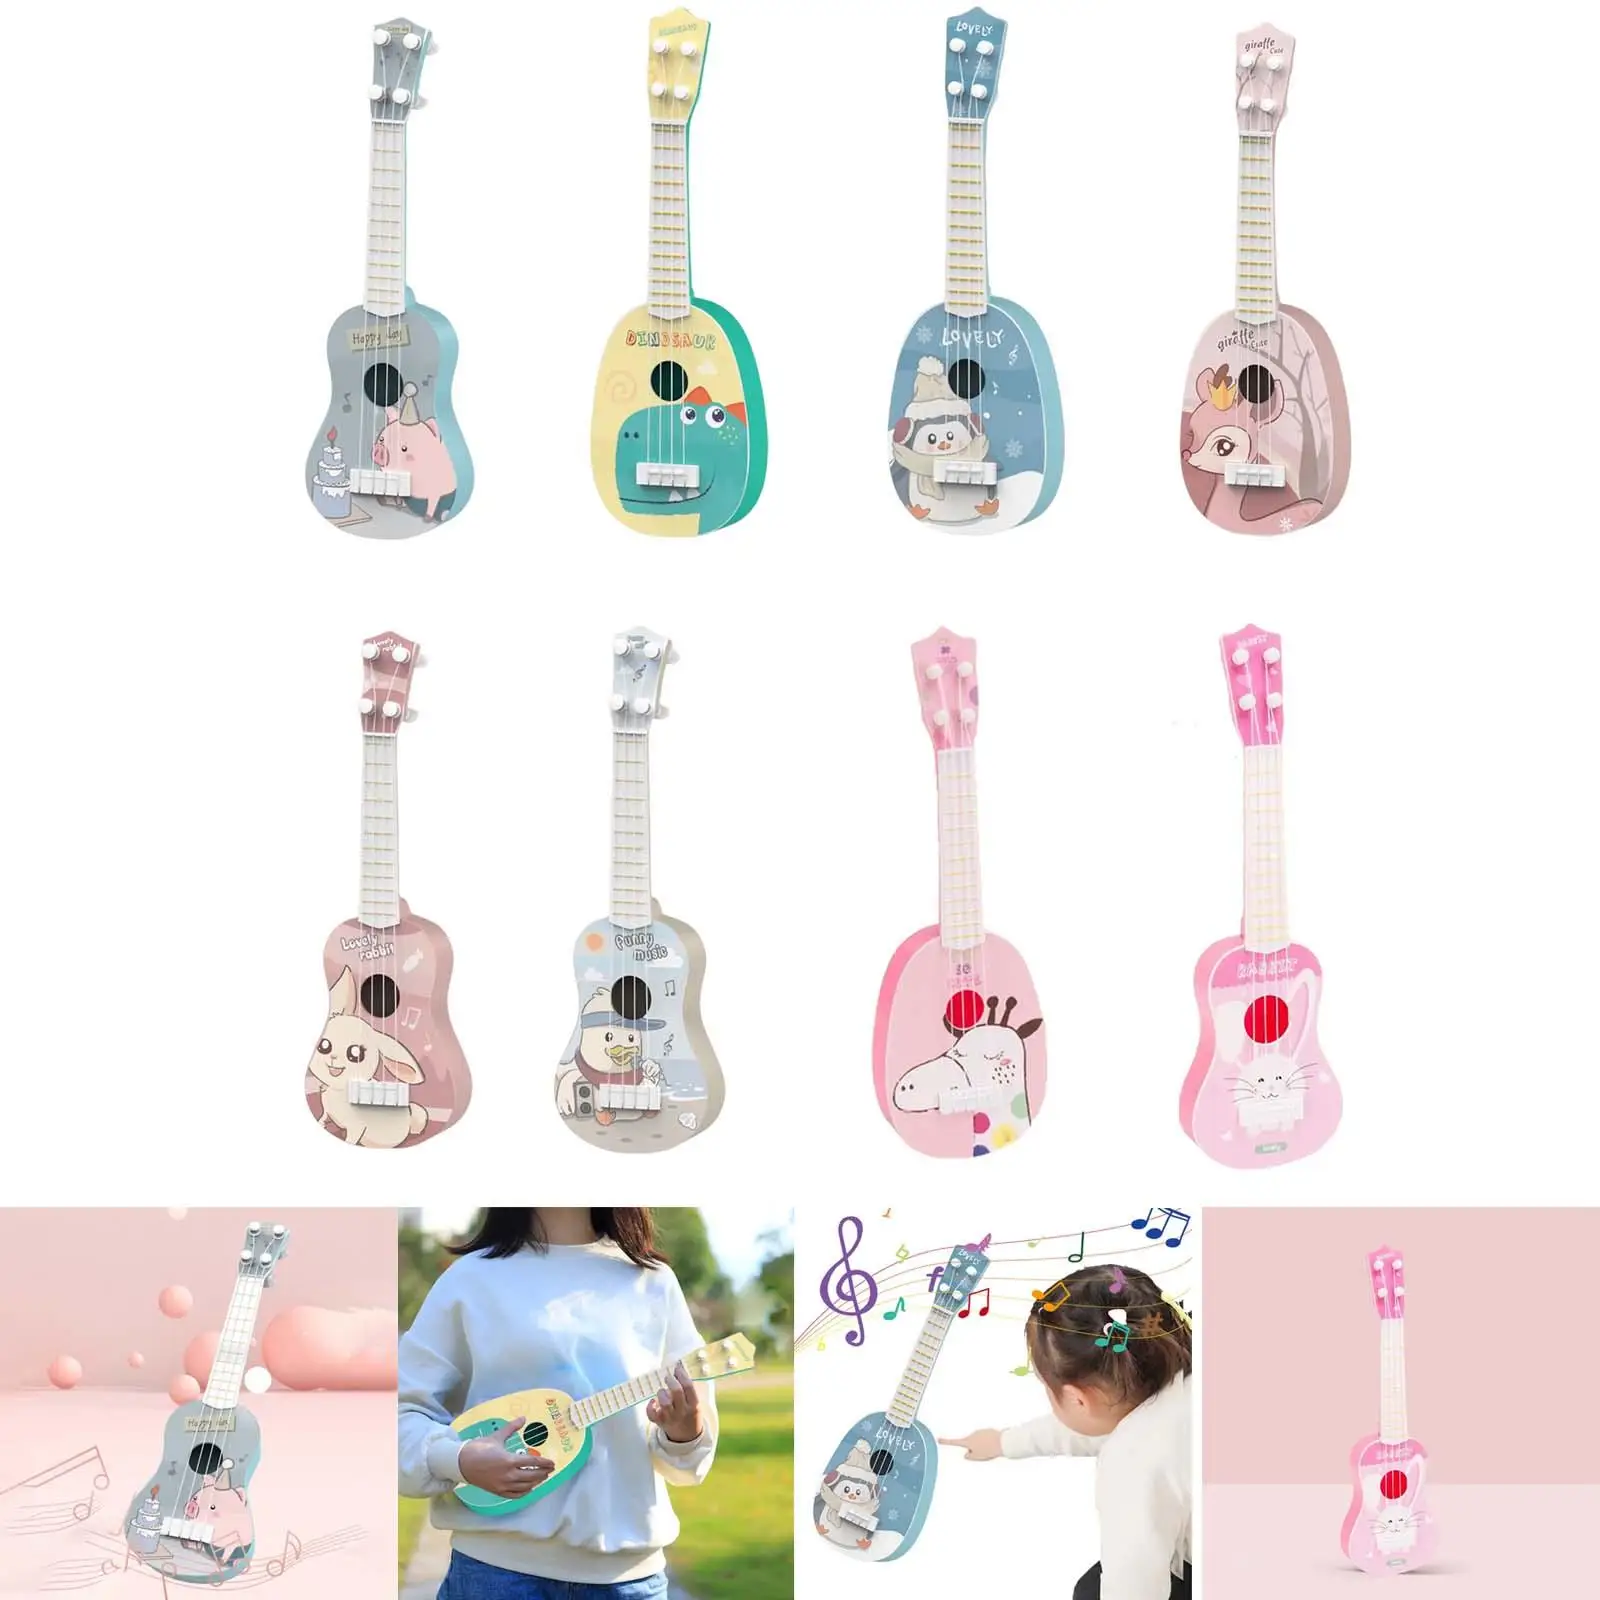 Portable Kids Ukulele Toys Learning Education Toy with 4 String Musical Instrument Toy for Toddlers Kids Beginner Birthday Gifts